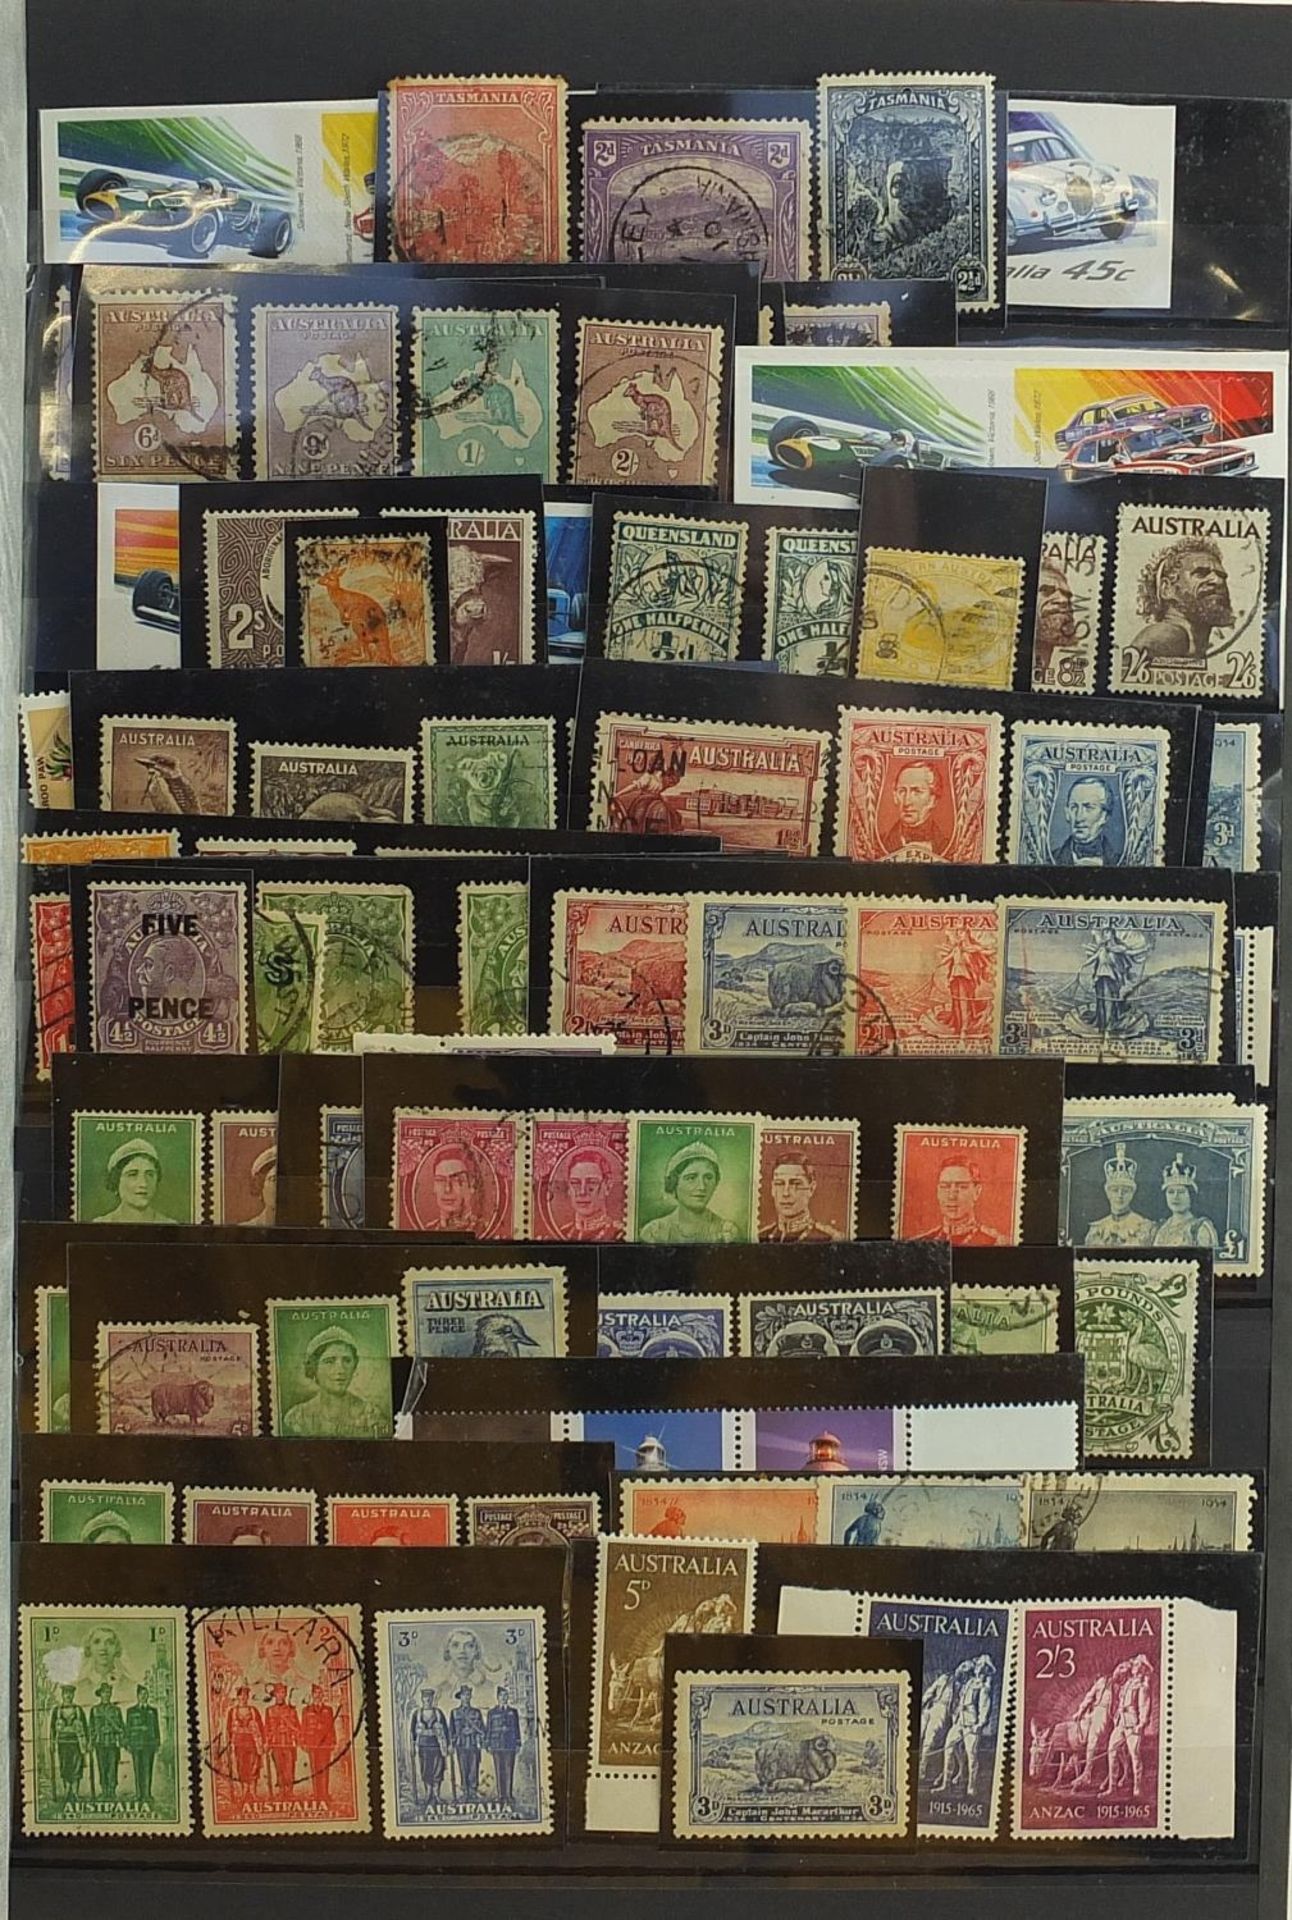 Commonwealth and colonial stamps arranged in an album including Africa, Australia and six colour